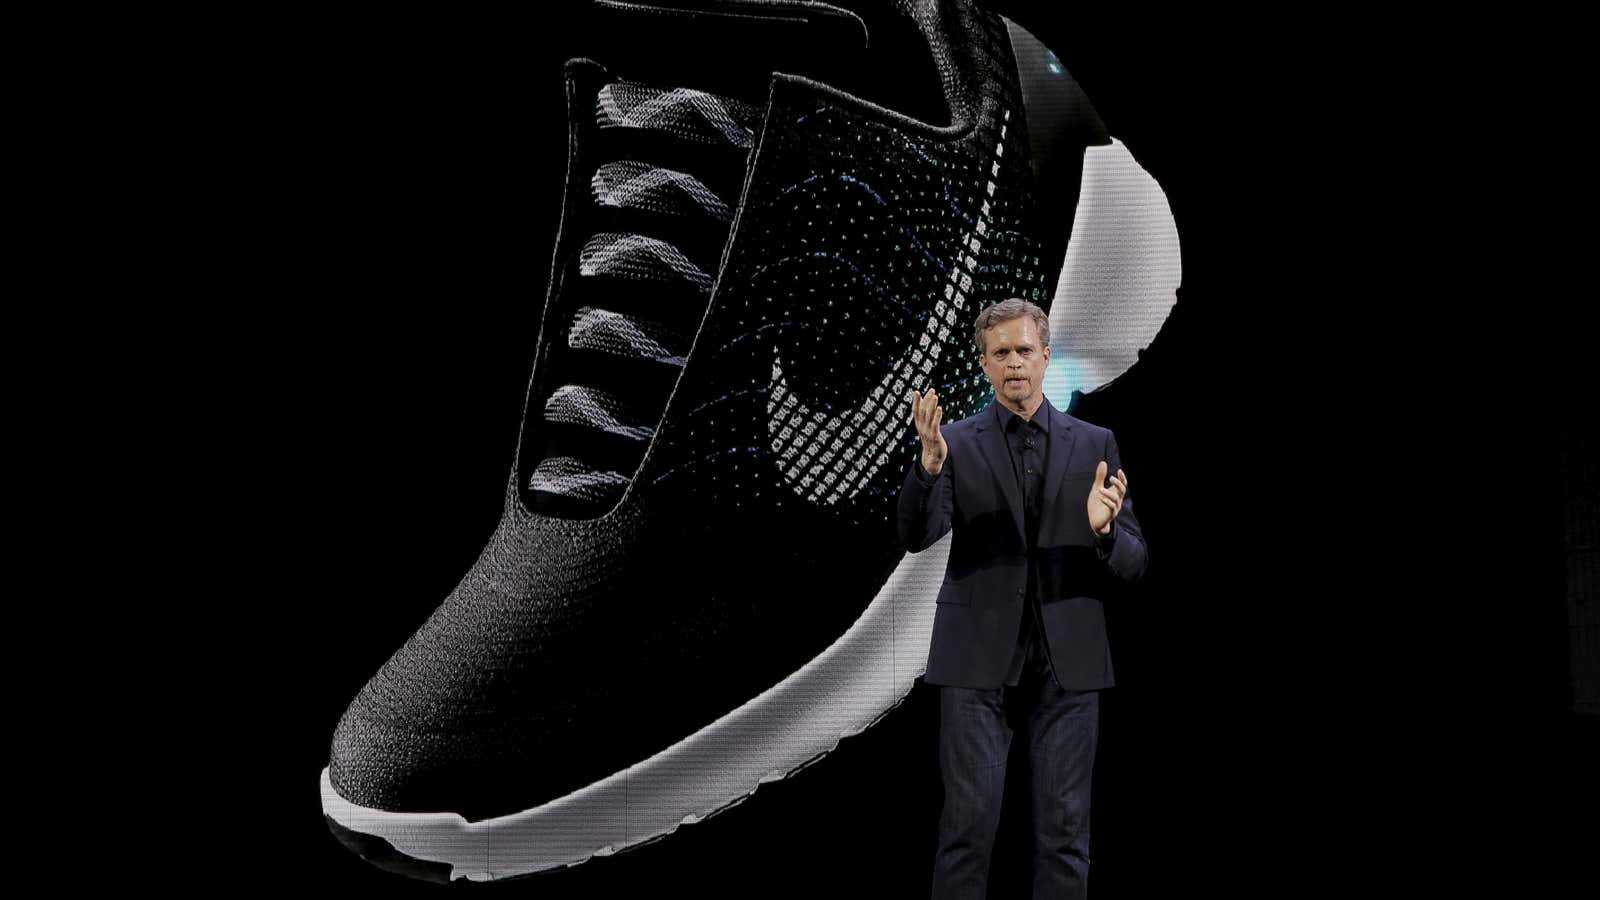 More than two years after Nike introduced the HyperAdapt 1.0 (pictured), CEO Mark Parker says the next generation is coming.